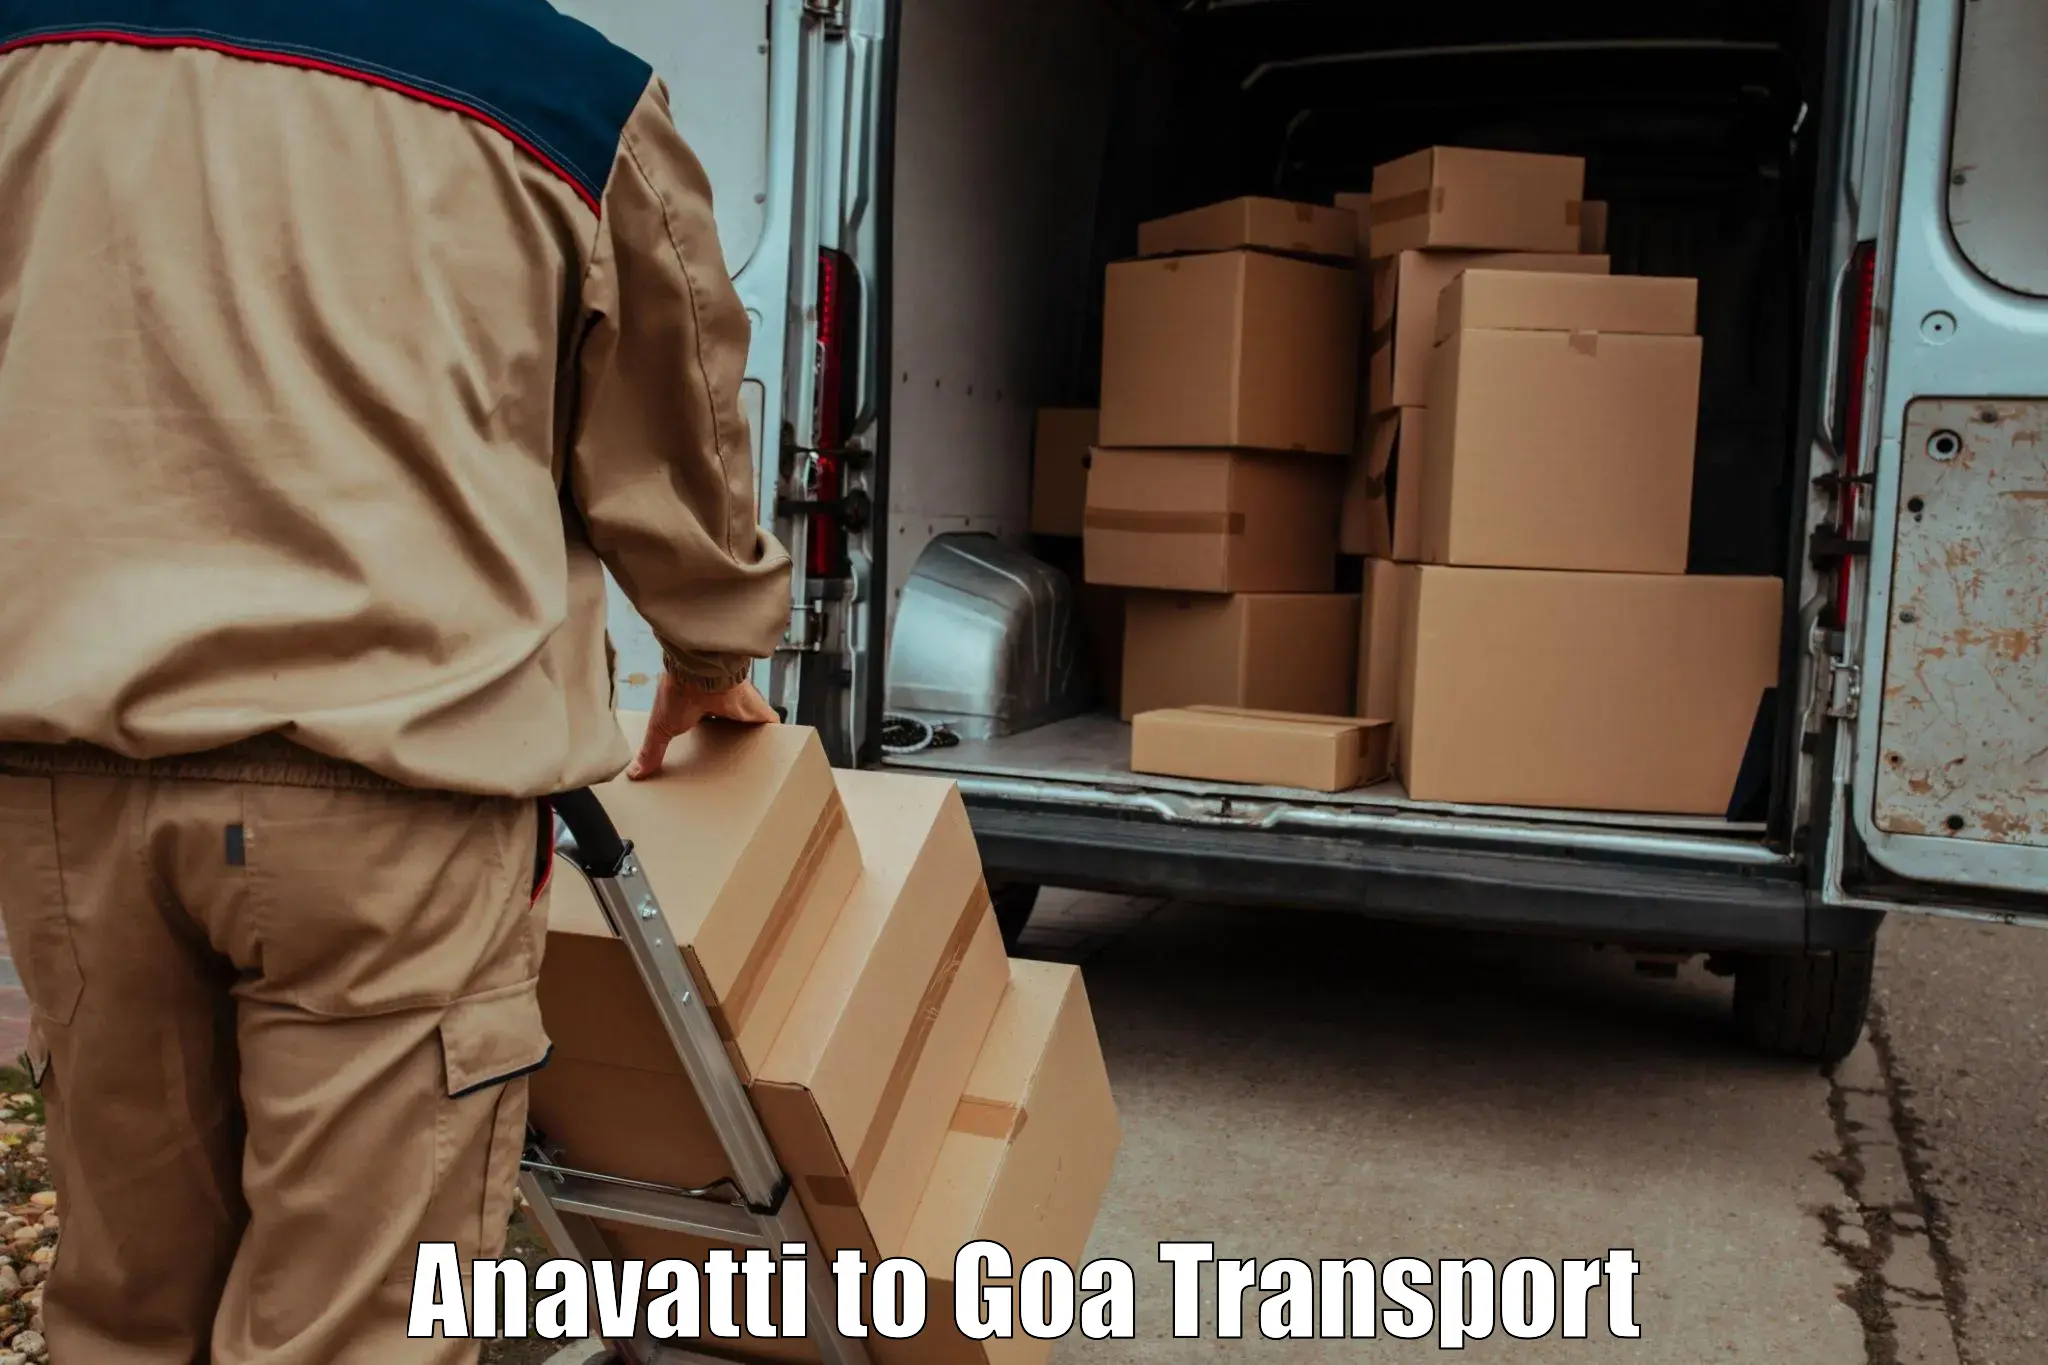 Express transport services in Anavatti to Goa